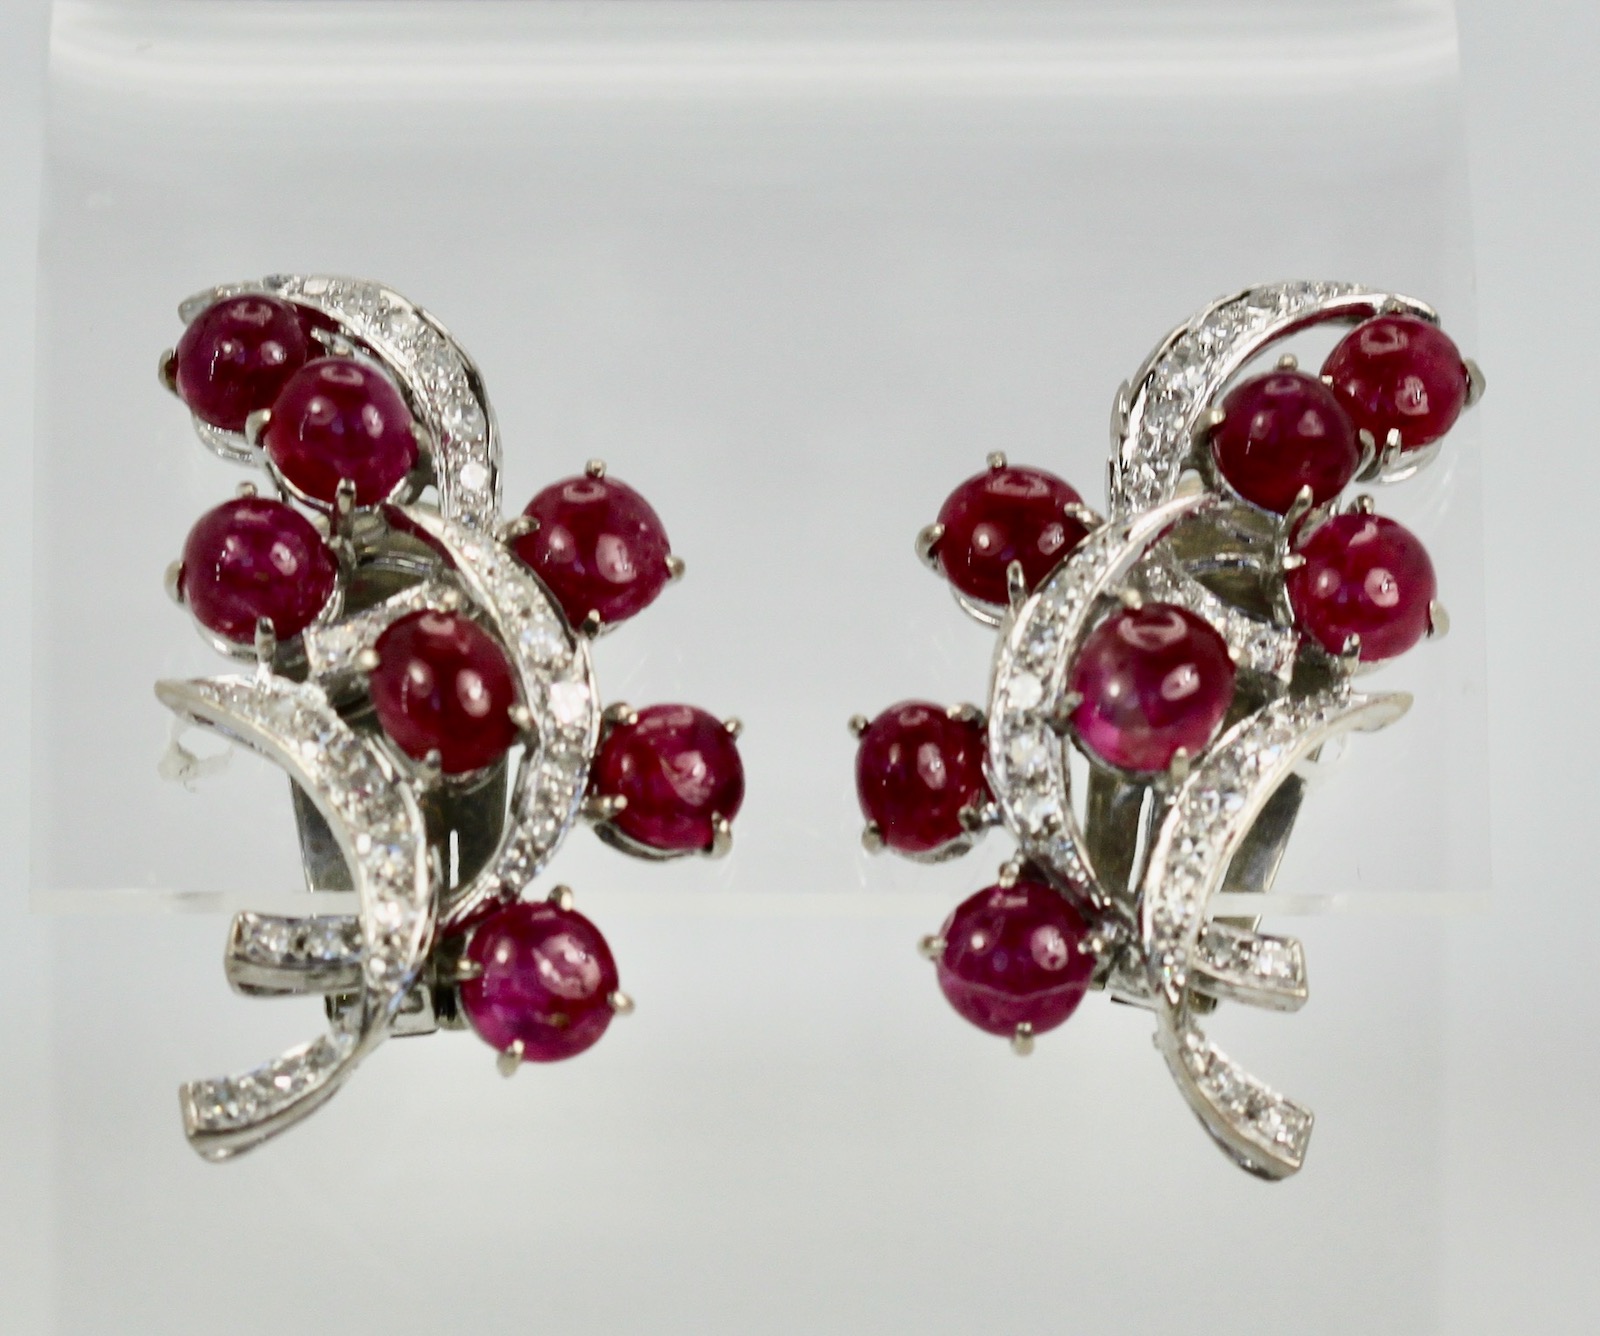 Cabochon Ruby and Diamond Earrings in 18K White Gold | World's Best